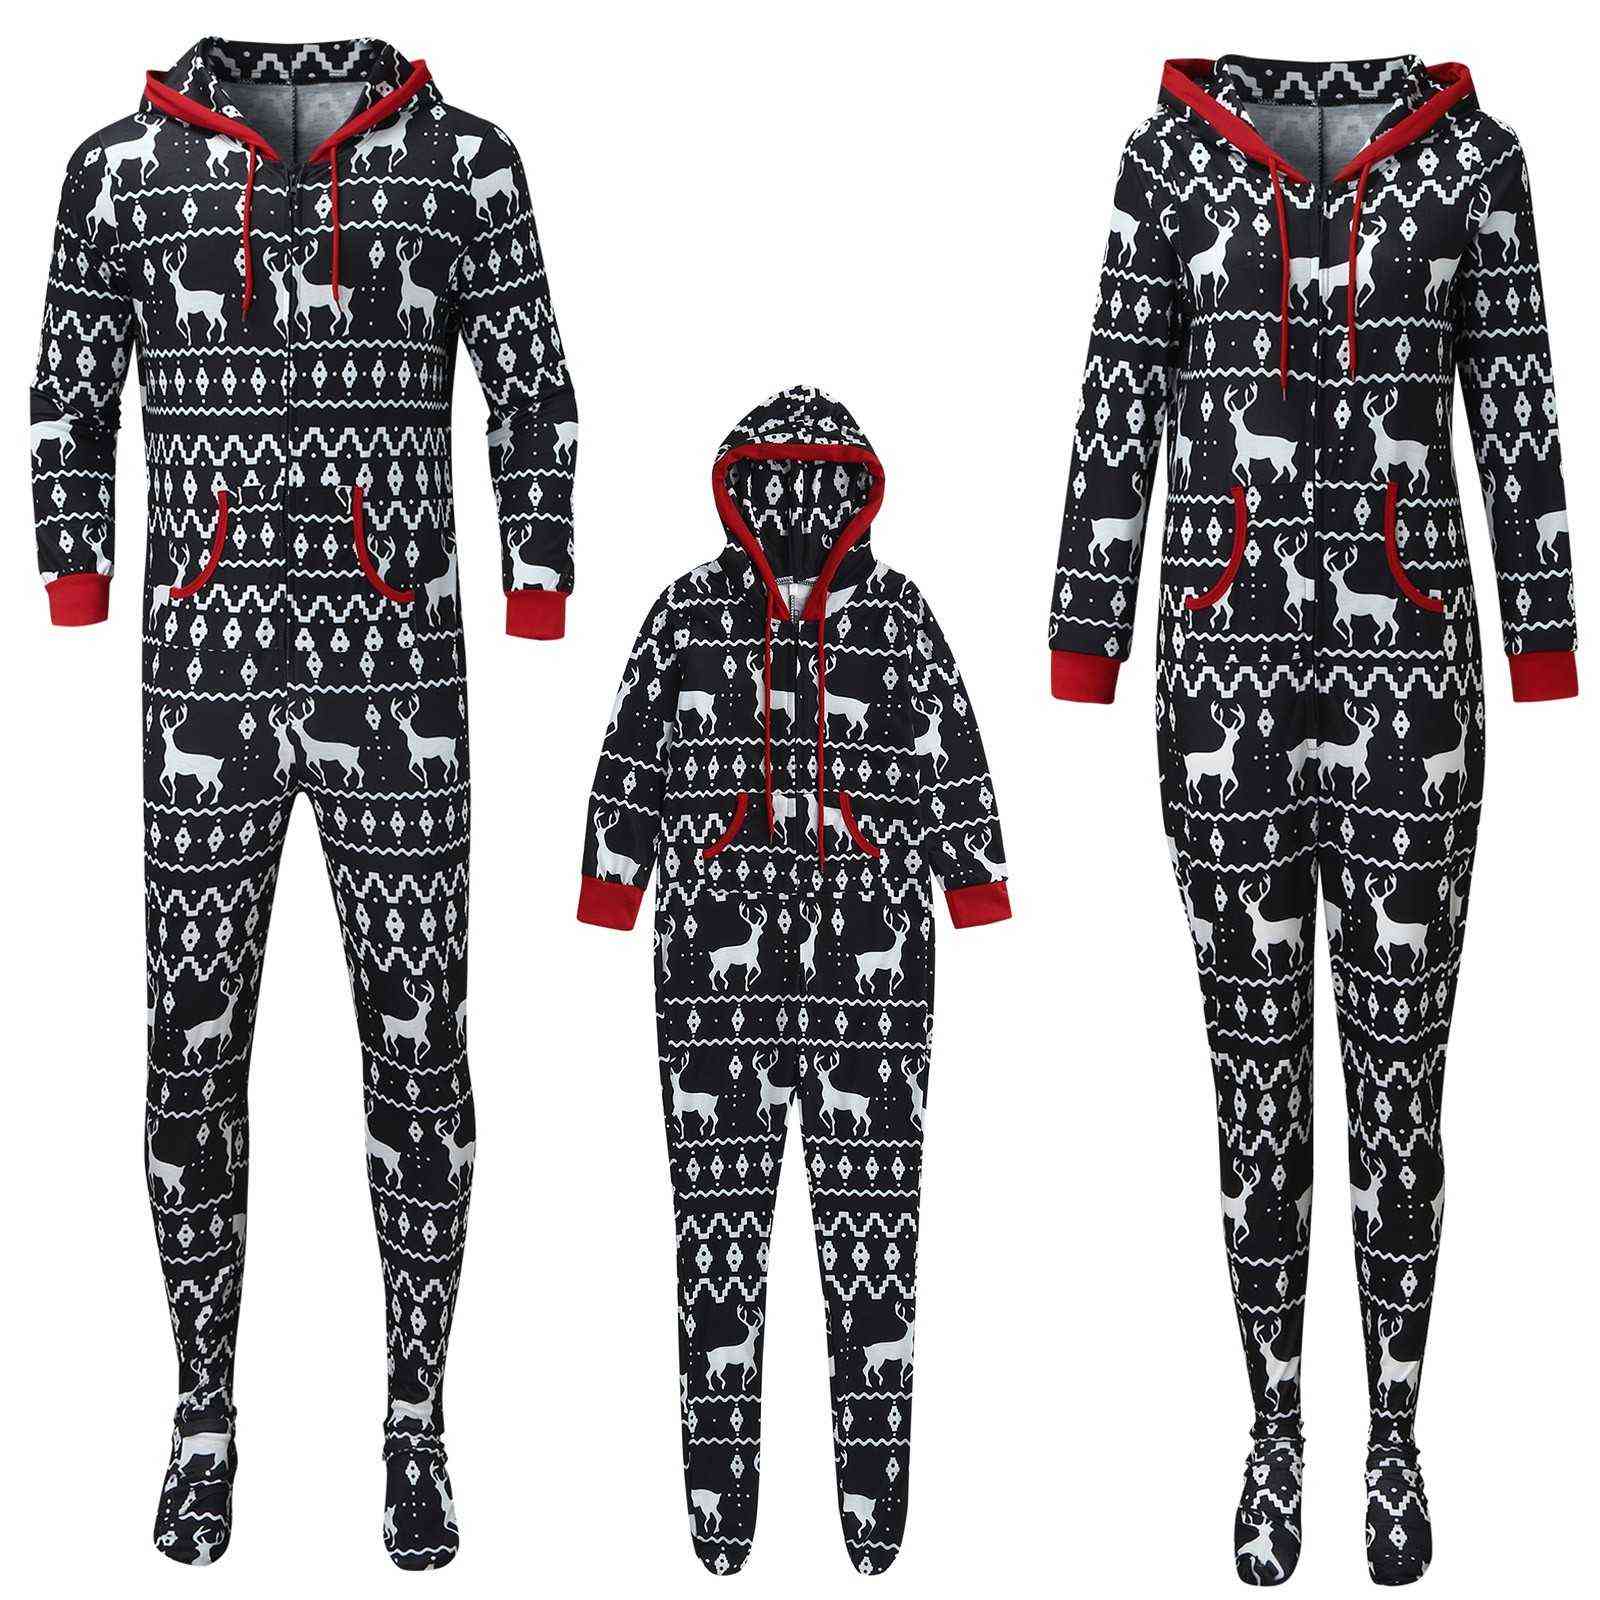 

Christmas Family Matching Outfits Onesie Pajamas 2022 Dear Adult Kid Home Clothes New Year Lucky Deer Sleepwear Baby Romper L3 H1014, Black